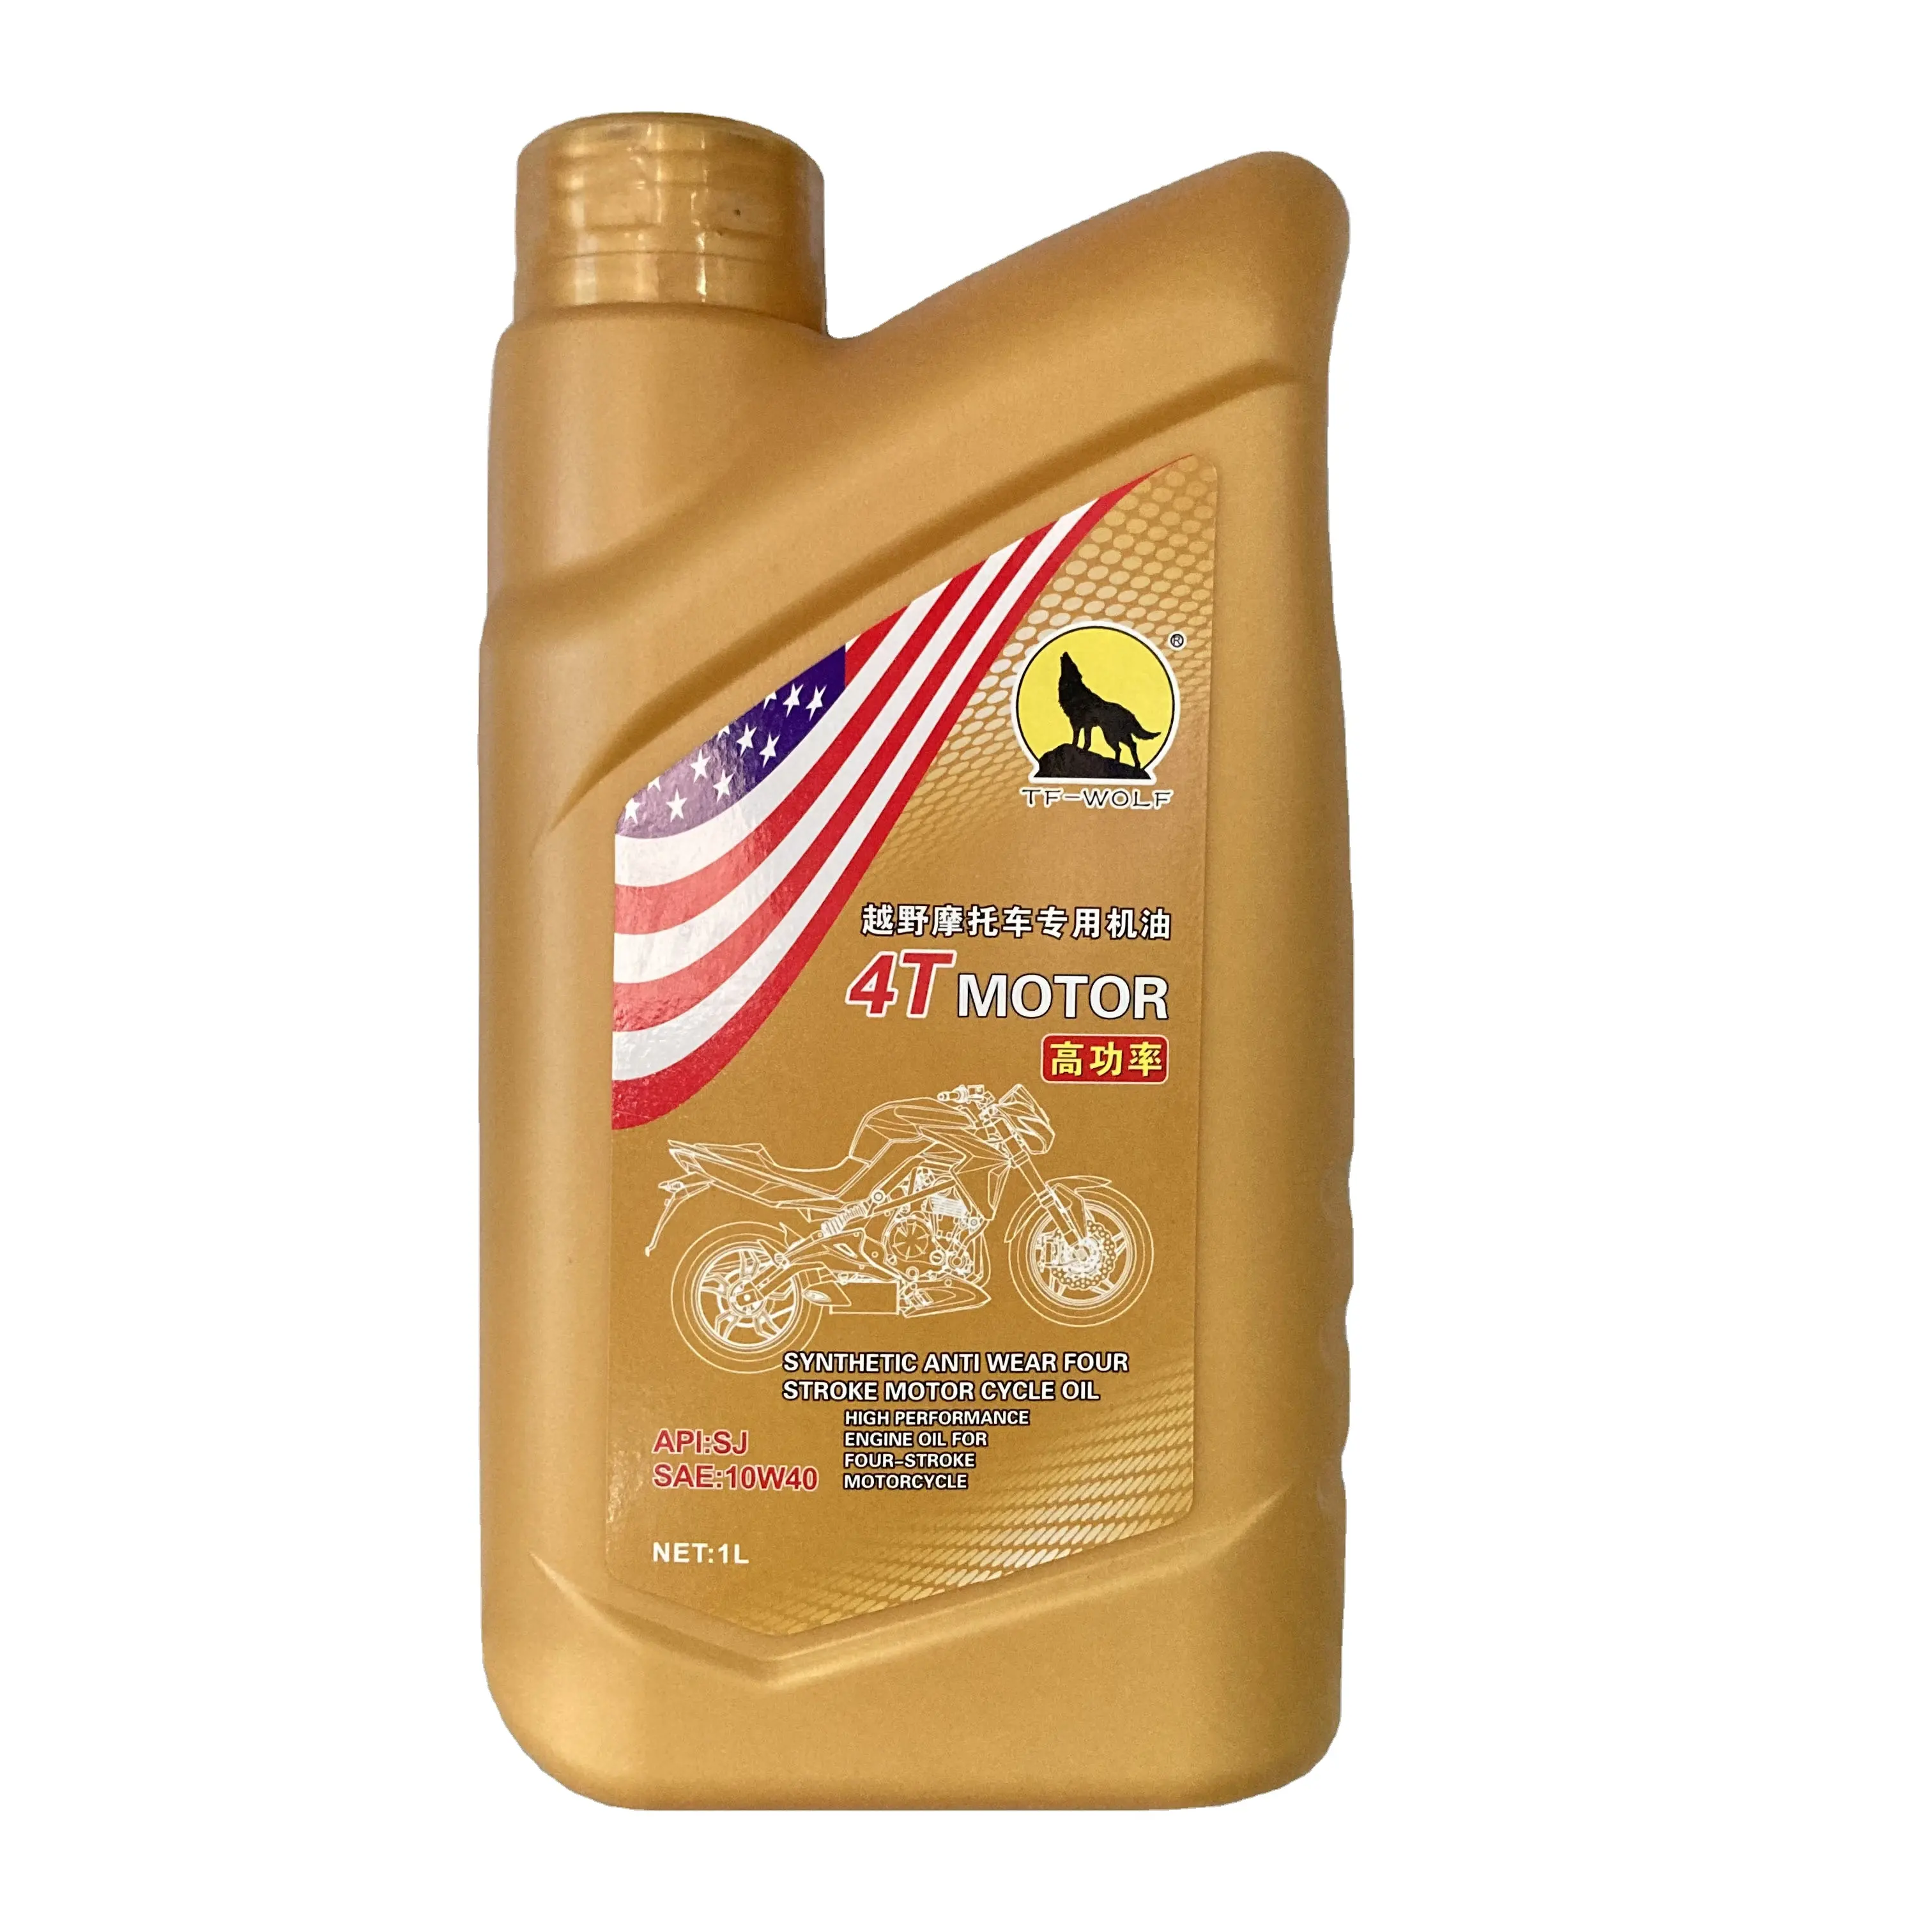 Selling high quality dirt bike lubricant engine oil 4T motorcycle engine oil